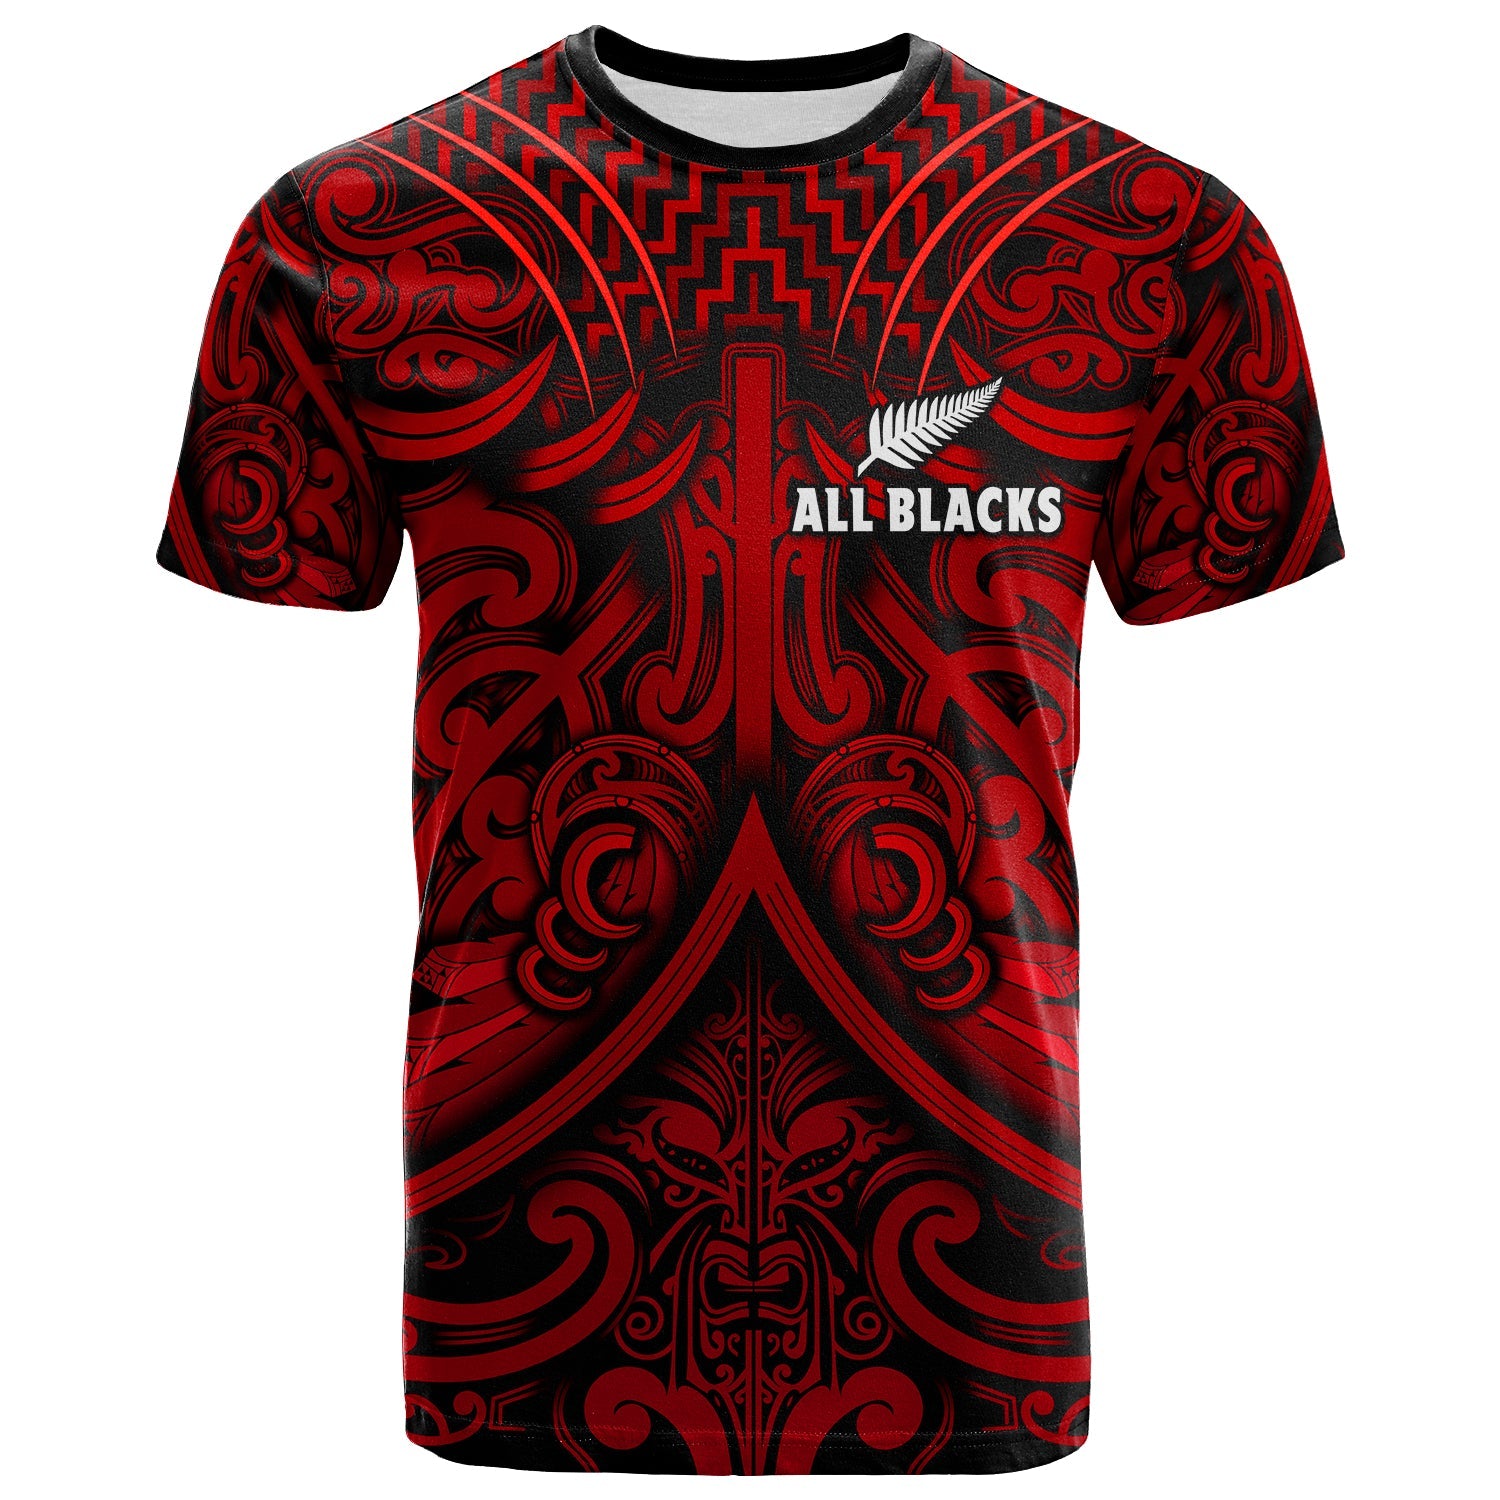 (Custom Text and Number) New Zealand Silver Fern Rugby T Shirt All Black Red NZ Maori Pattern LT13 Red - Polynesian Pride